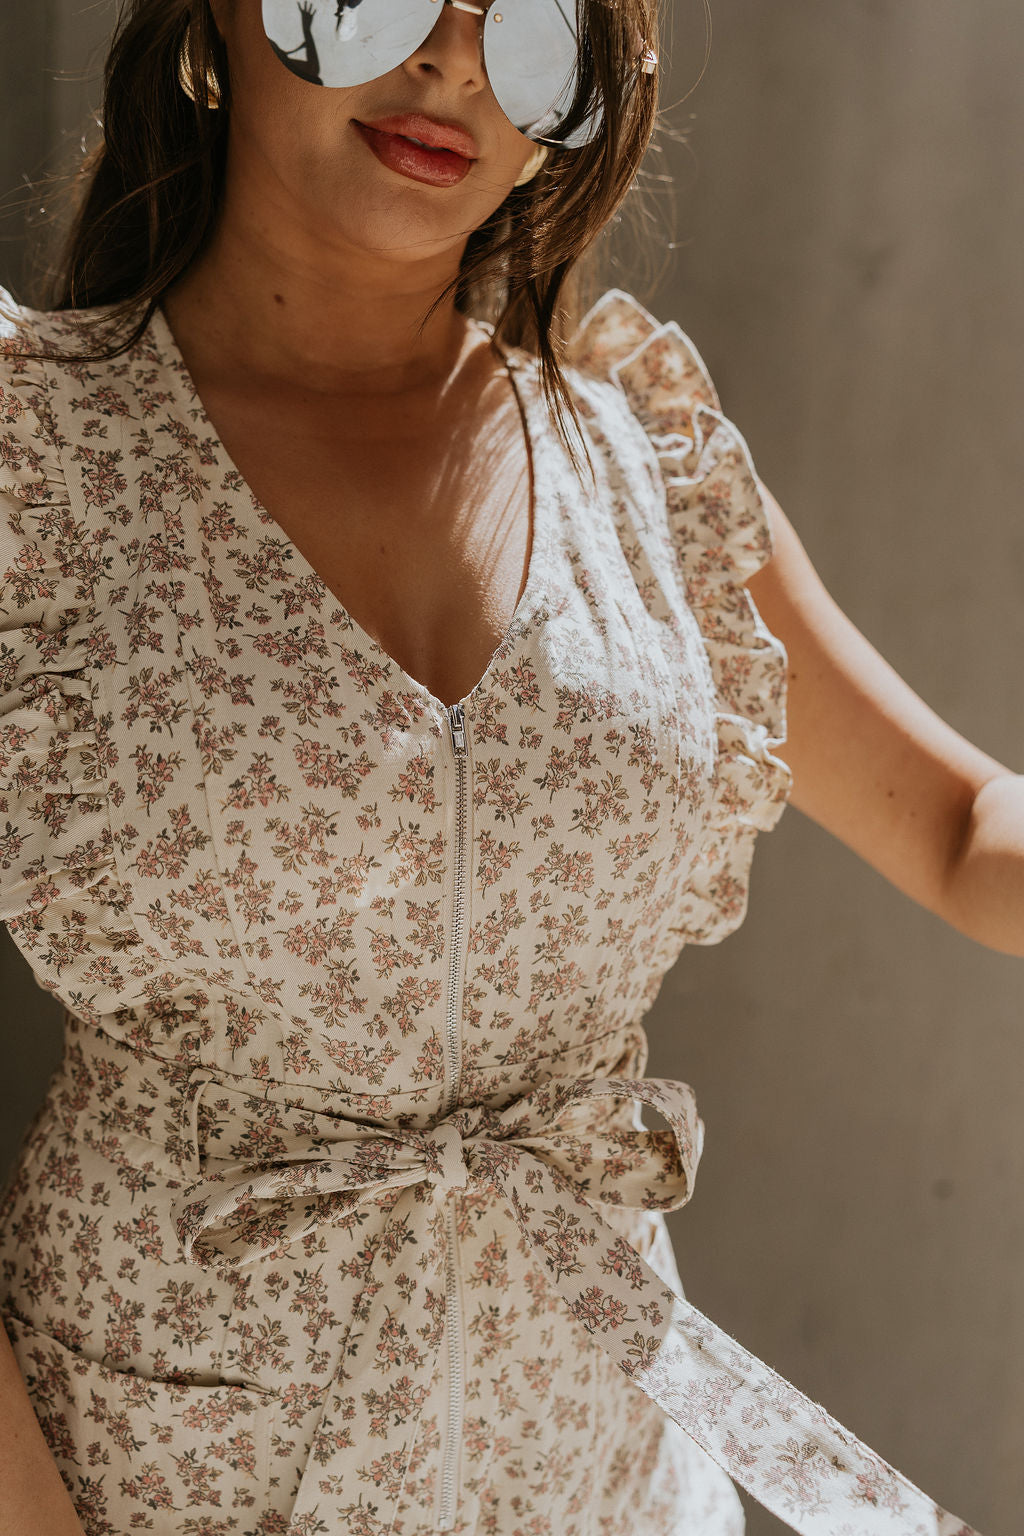 Close up view of female model wearing the Myla Cream Pink Floral Sleeveless Jumpsuit which features Cream Cotton Fabric, Pink Floral Print, Wide Leg Pants, Tie Strap with Belt Loops, V-Neckline and Ruffle Straps